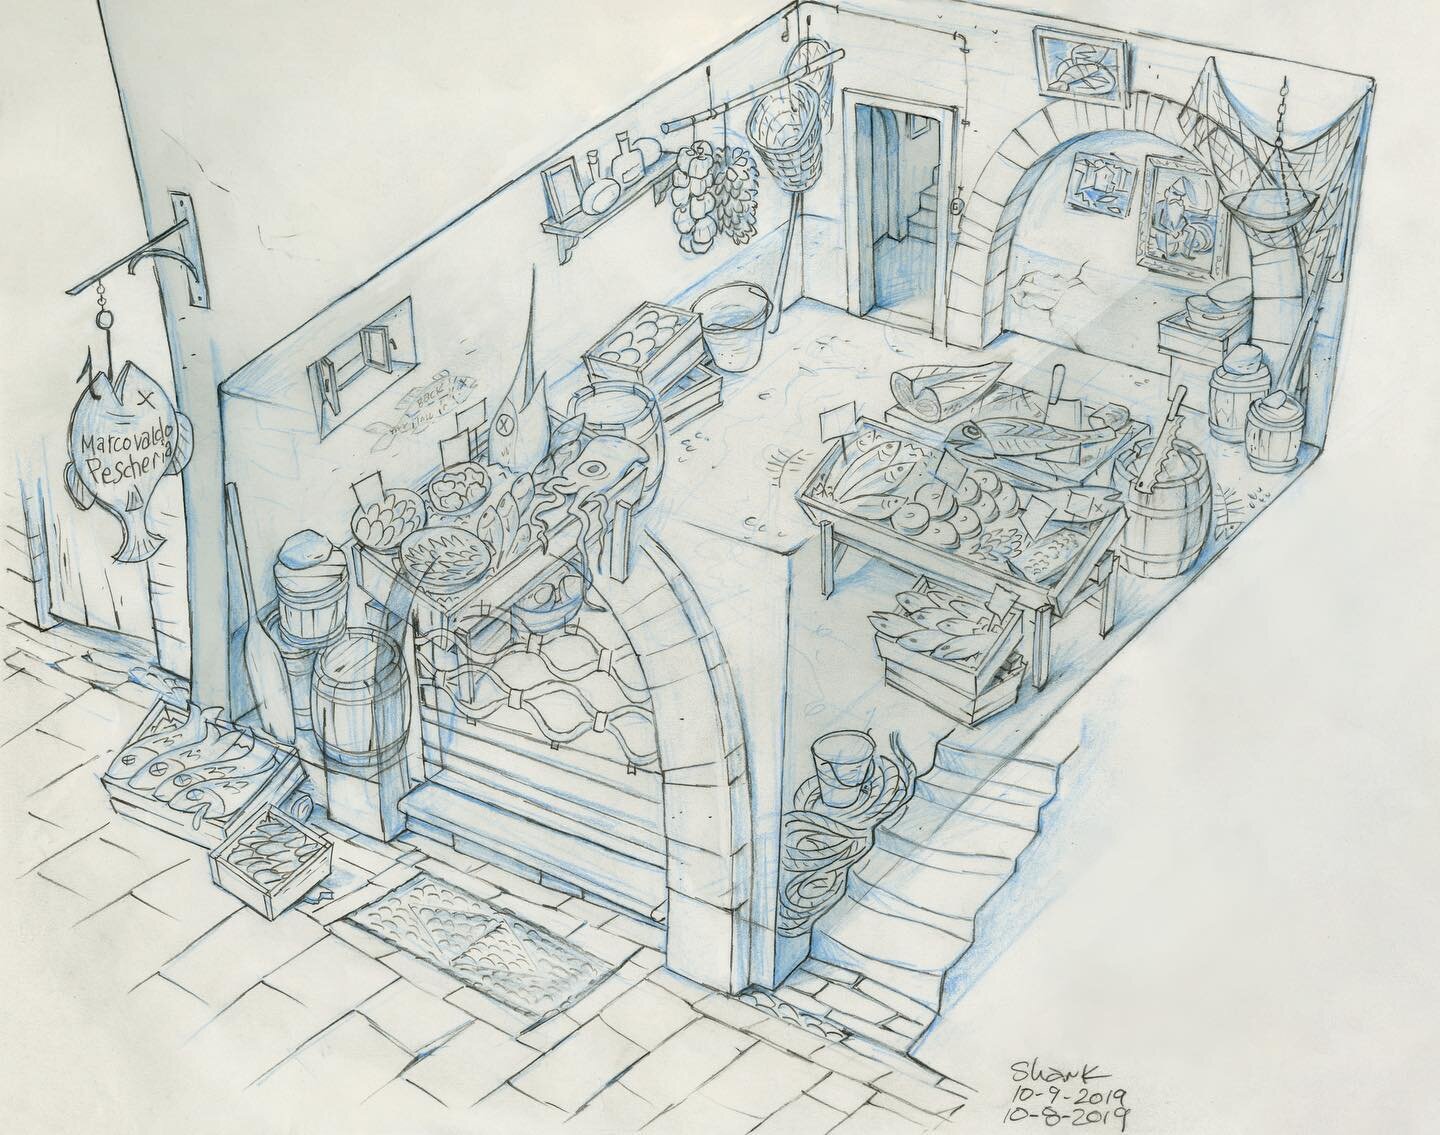 Pescheria Marcovaldo. This one is a heartbreaker. There was a long period of time where scenes took place in here. But in the final movie the doors aren't even open. This is one of my favorite drawings from my time on Luca but it wasn't meant to be. 